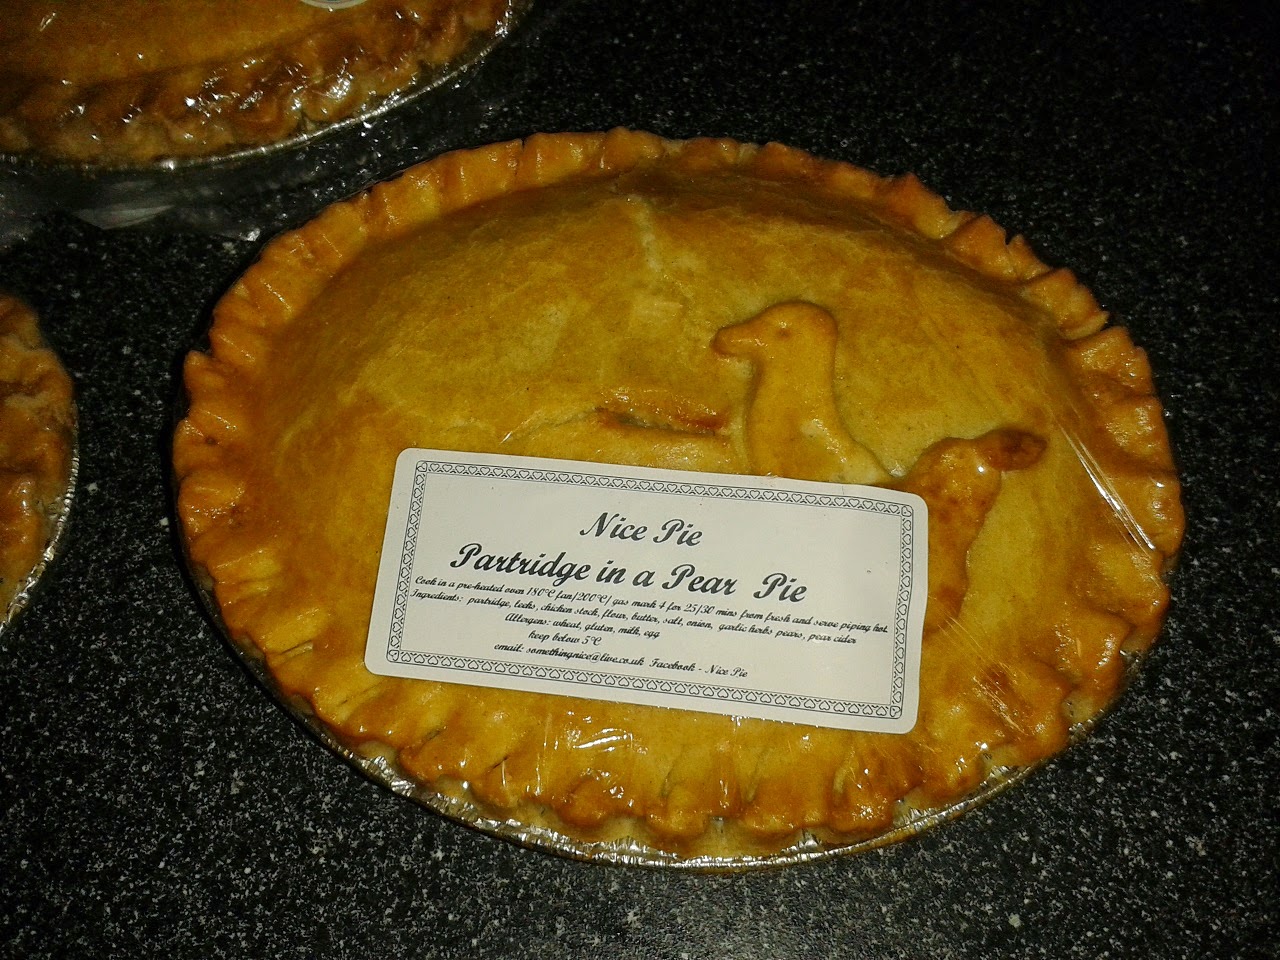 Partridge in a pear pie review